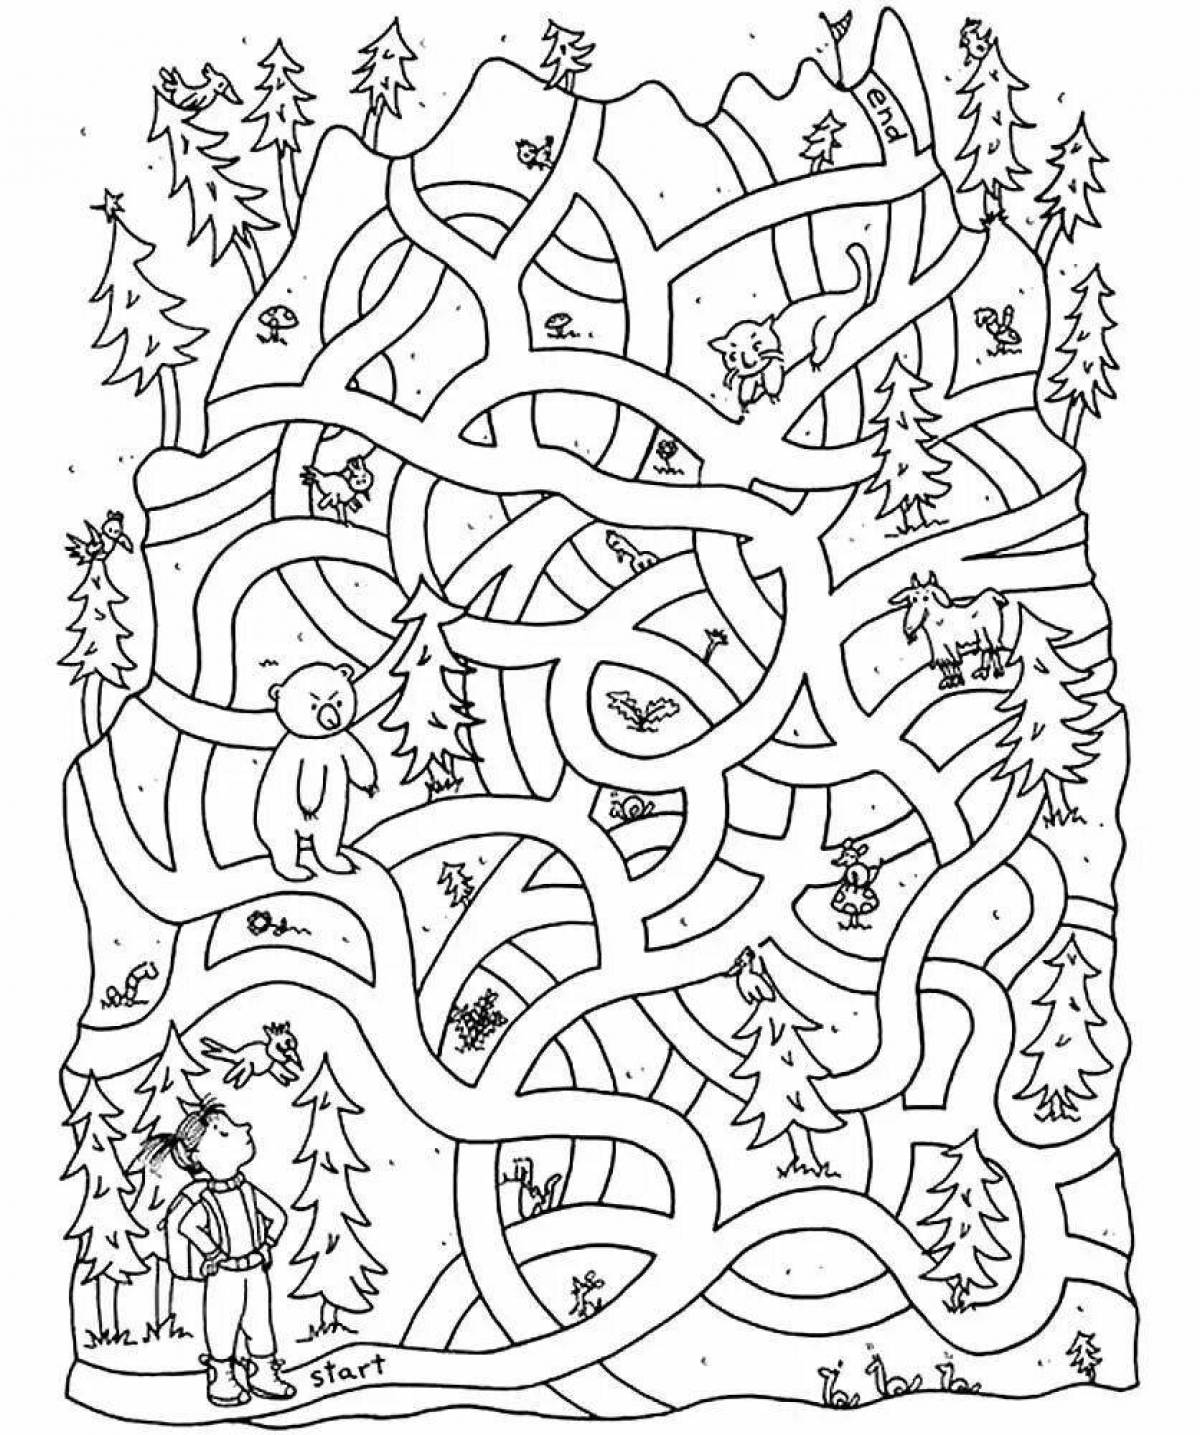 Intriguing coloring puzzles for 10 year olds